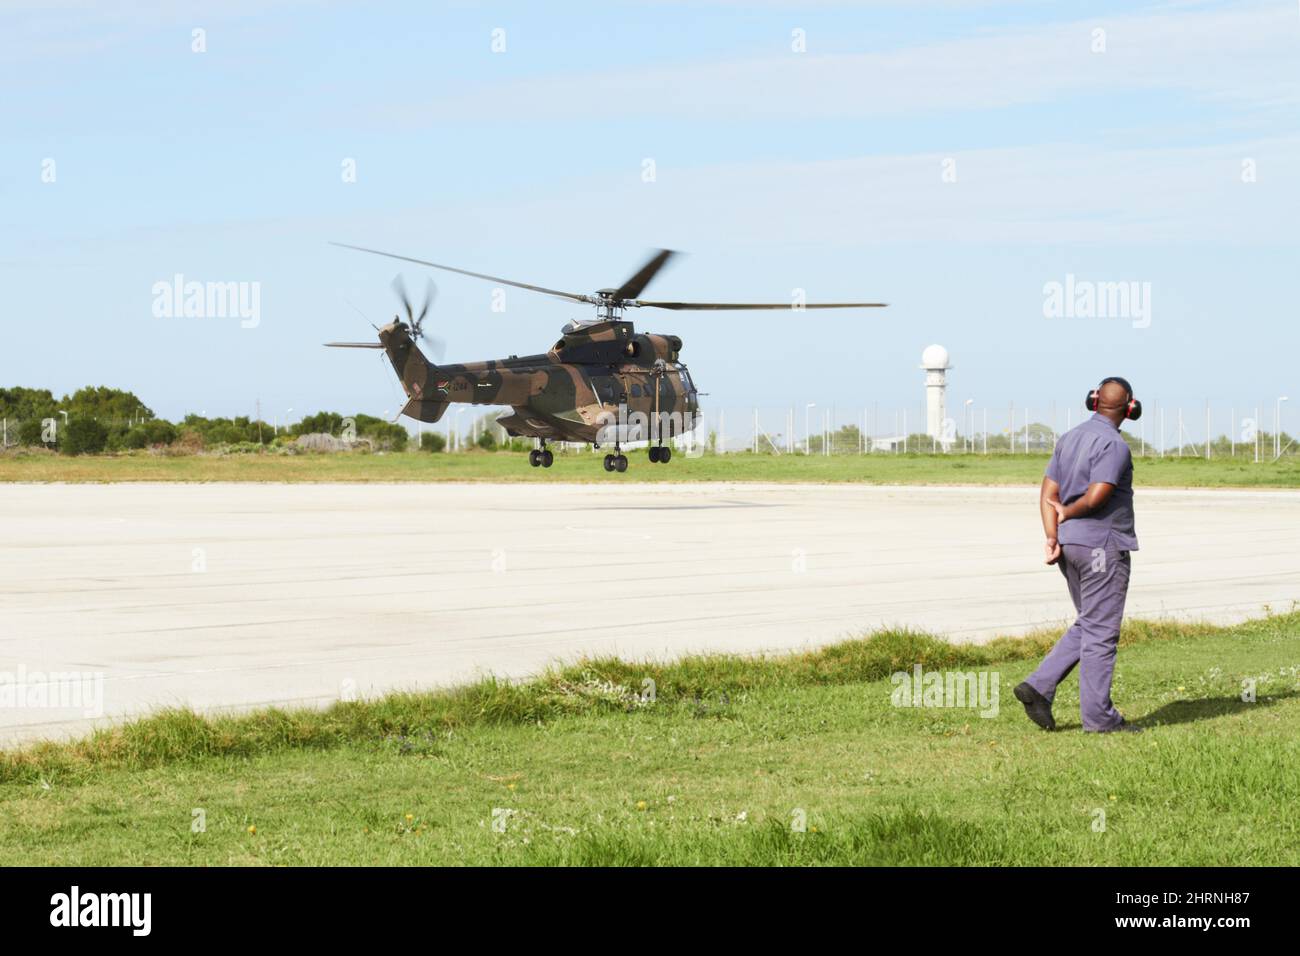 Coming in for a land. A helicopter landing on a launchpad while an officer stands on the side. Stock Photo